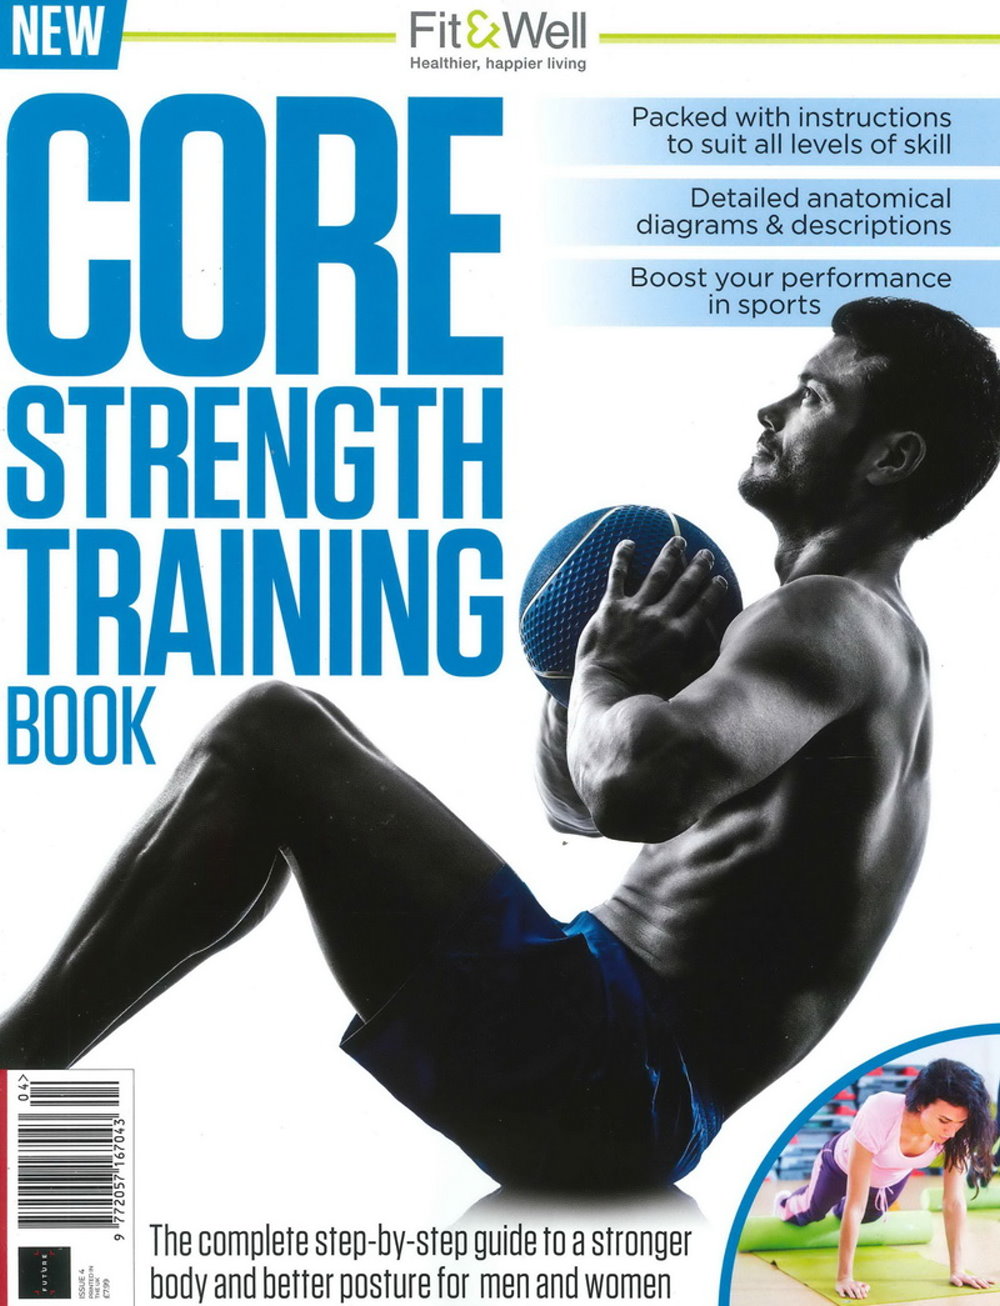 fit & well CORE STRENGTH TRAINING BOOK 第4期